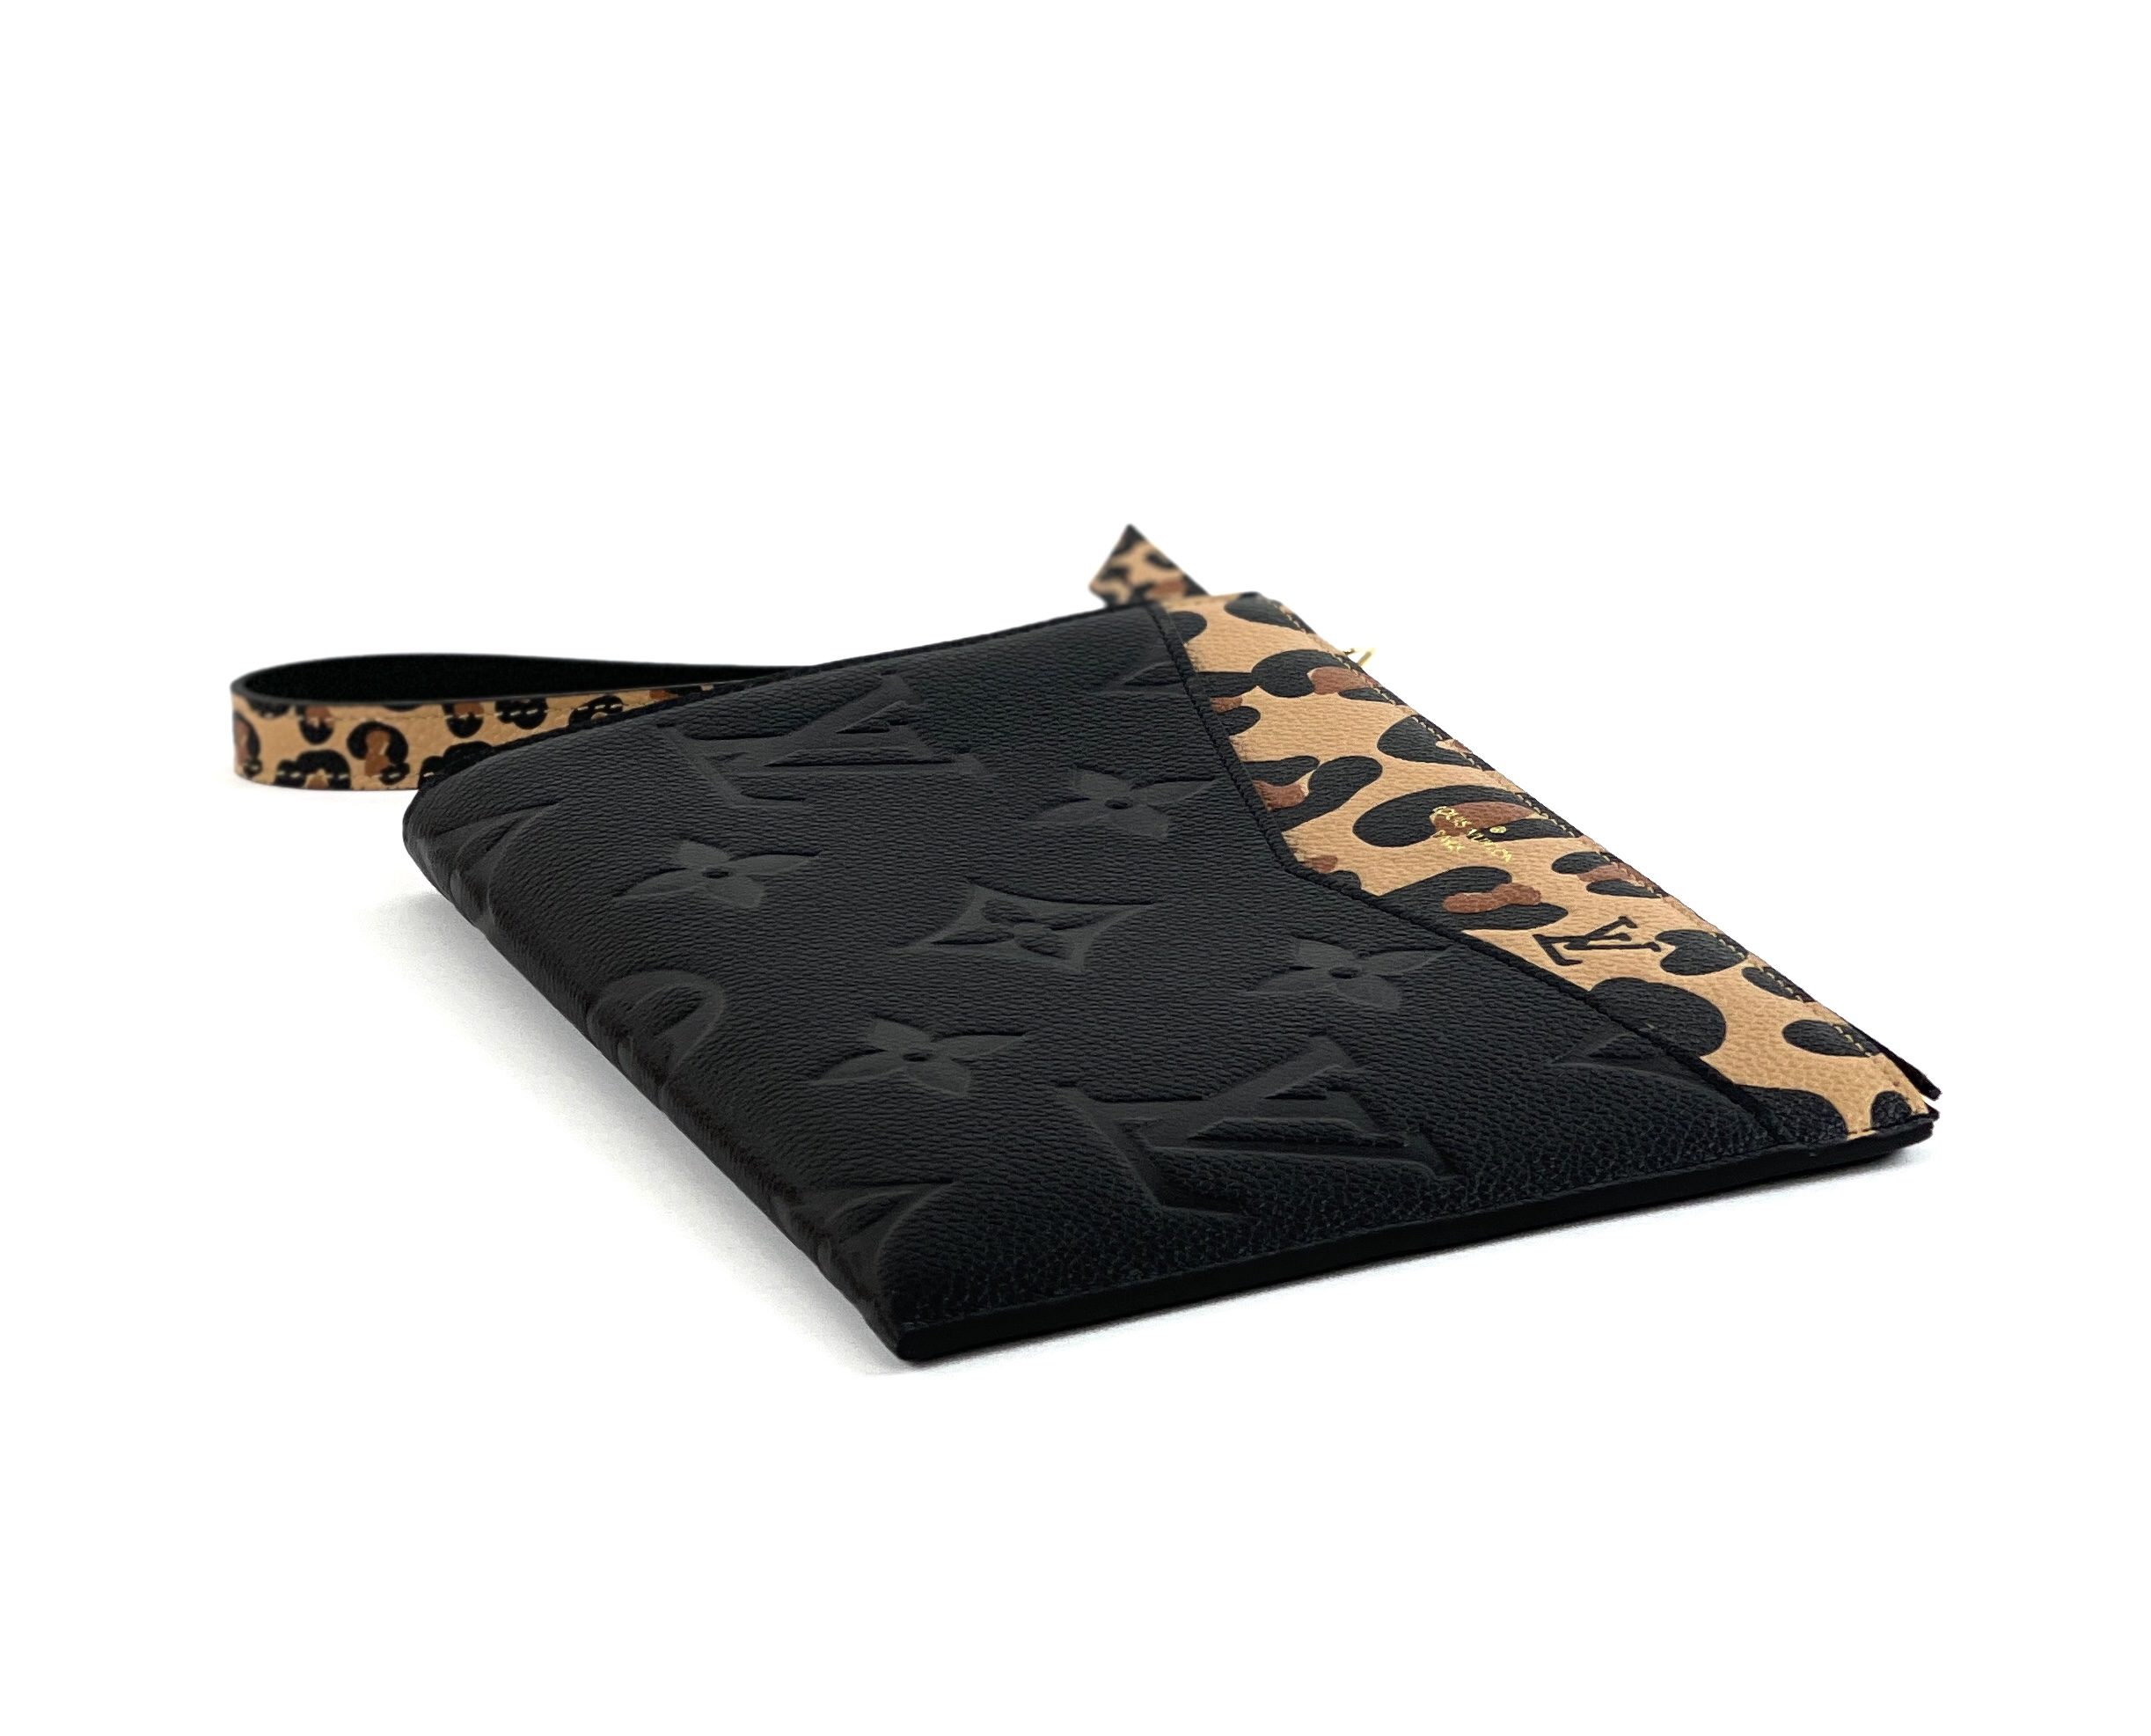 Louis Vuitton Wild At Heart Black Leopard Neverfull and Pouch Set - A World  Of Goods For You, LLC